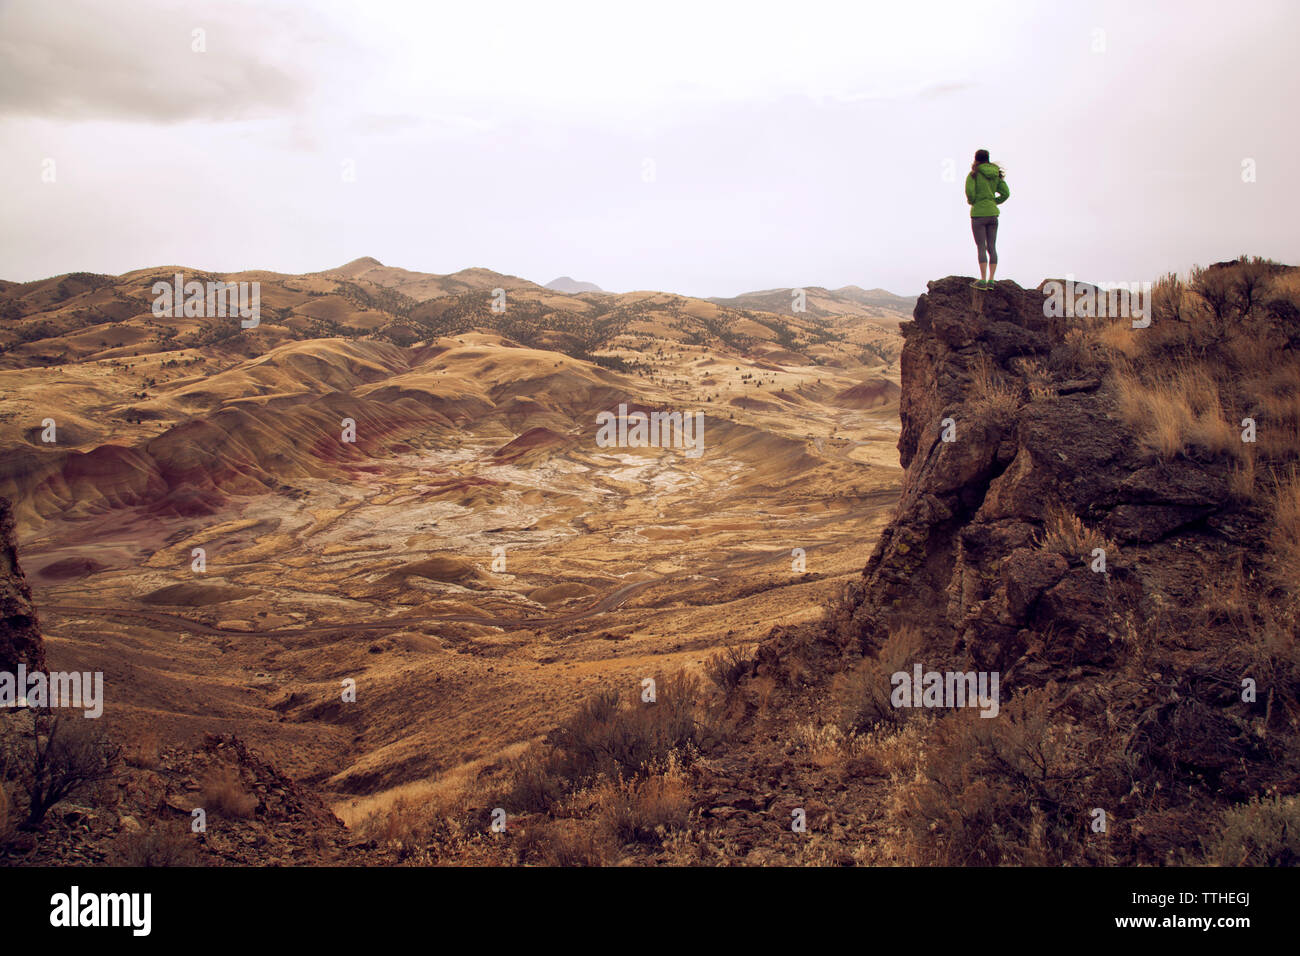 Woman standing on cliff against mountains Stock Photo